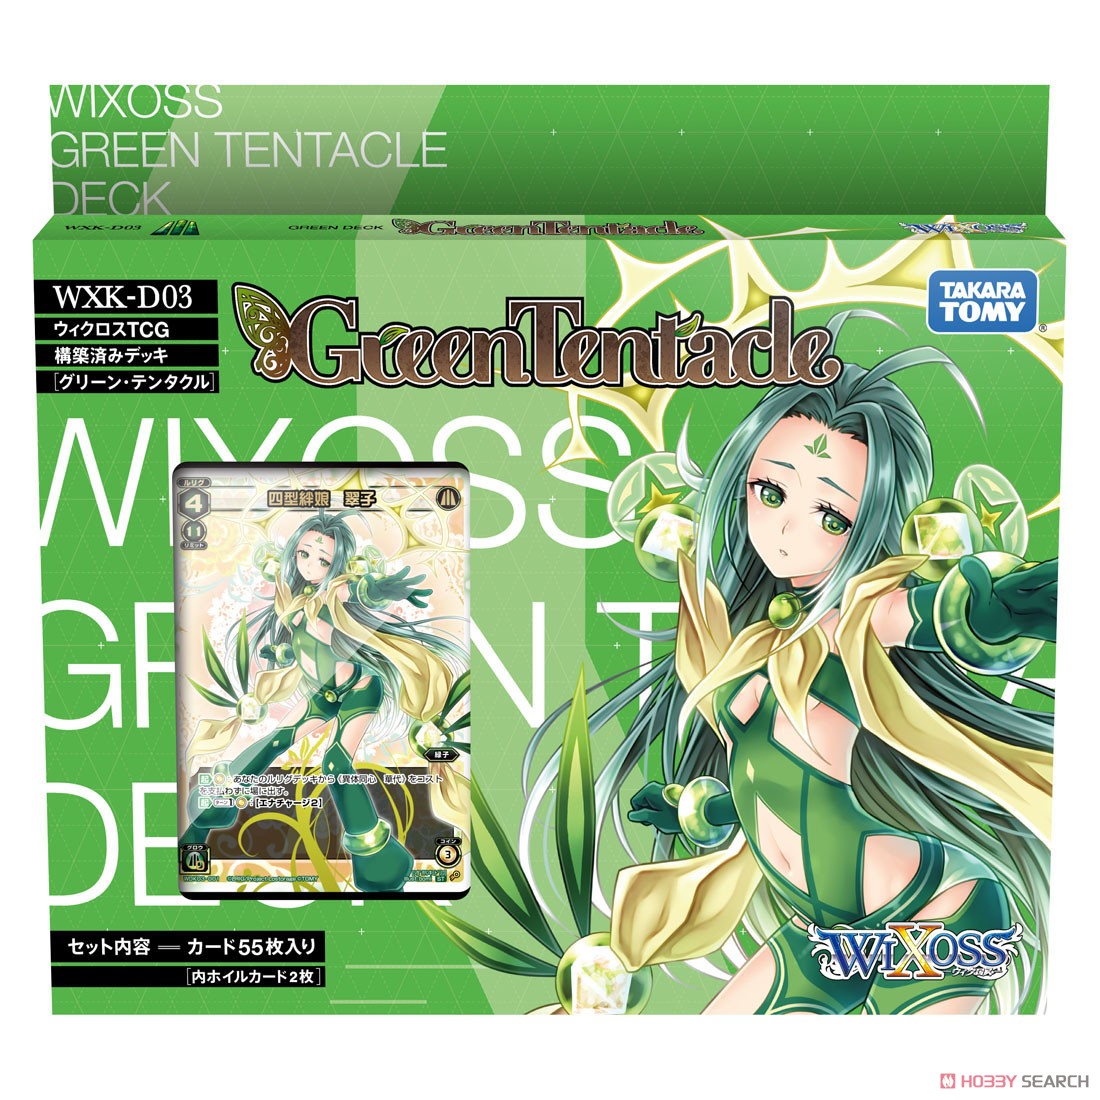 WXK-D03 Wixoss TCG Pre-constructed Deck Green Tentacle (Trading Cards) Package1